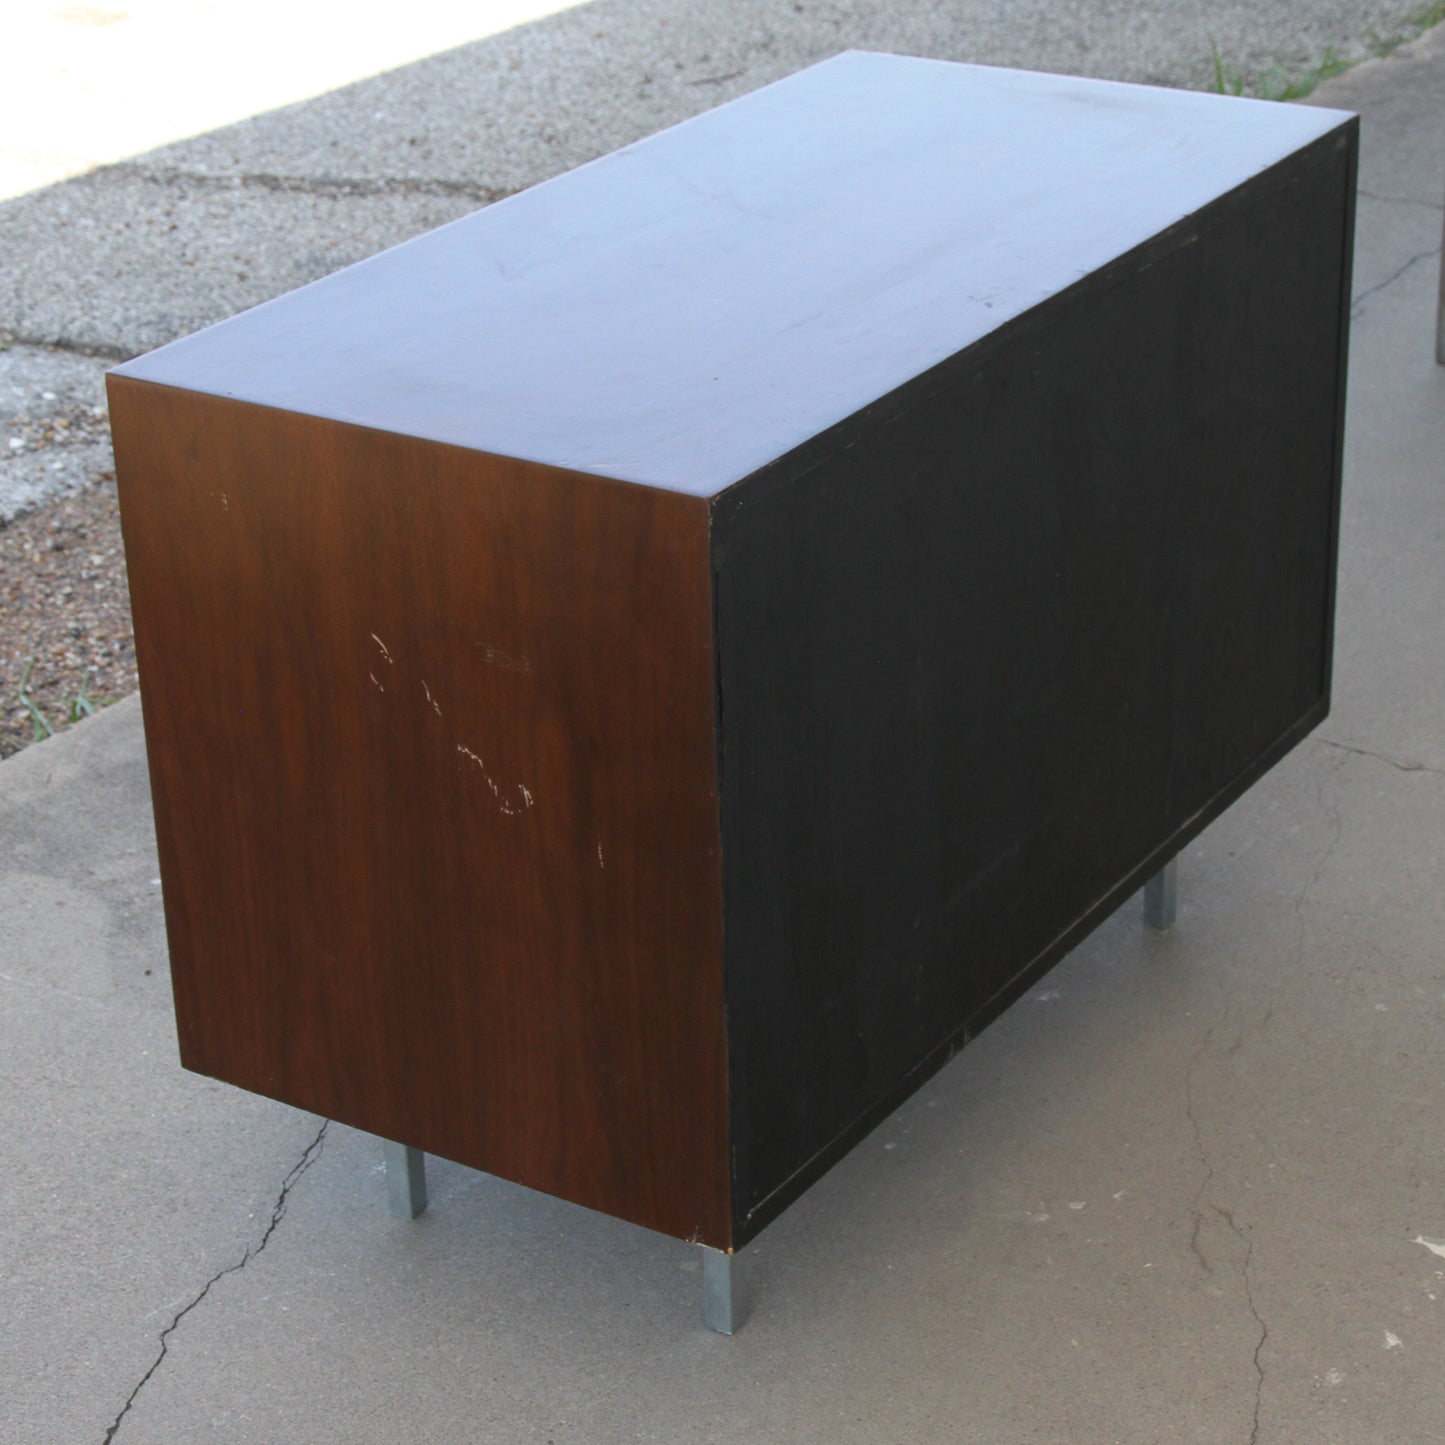 Knoll Credenza with Luxurious Leather Top and Cabinet Handles.